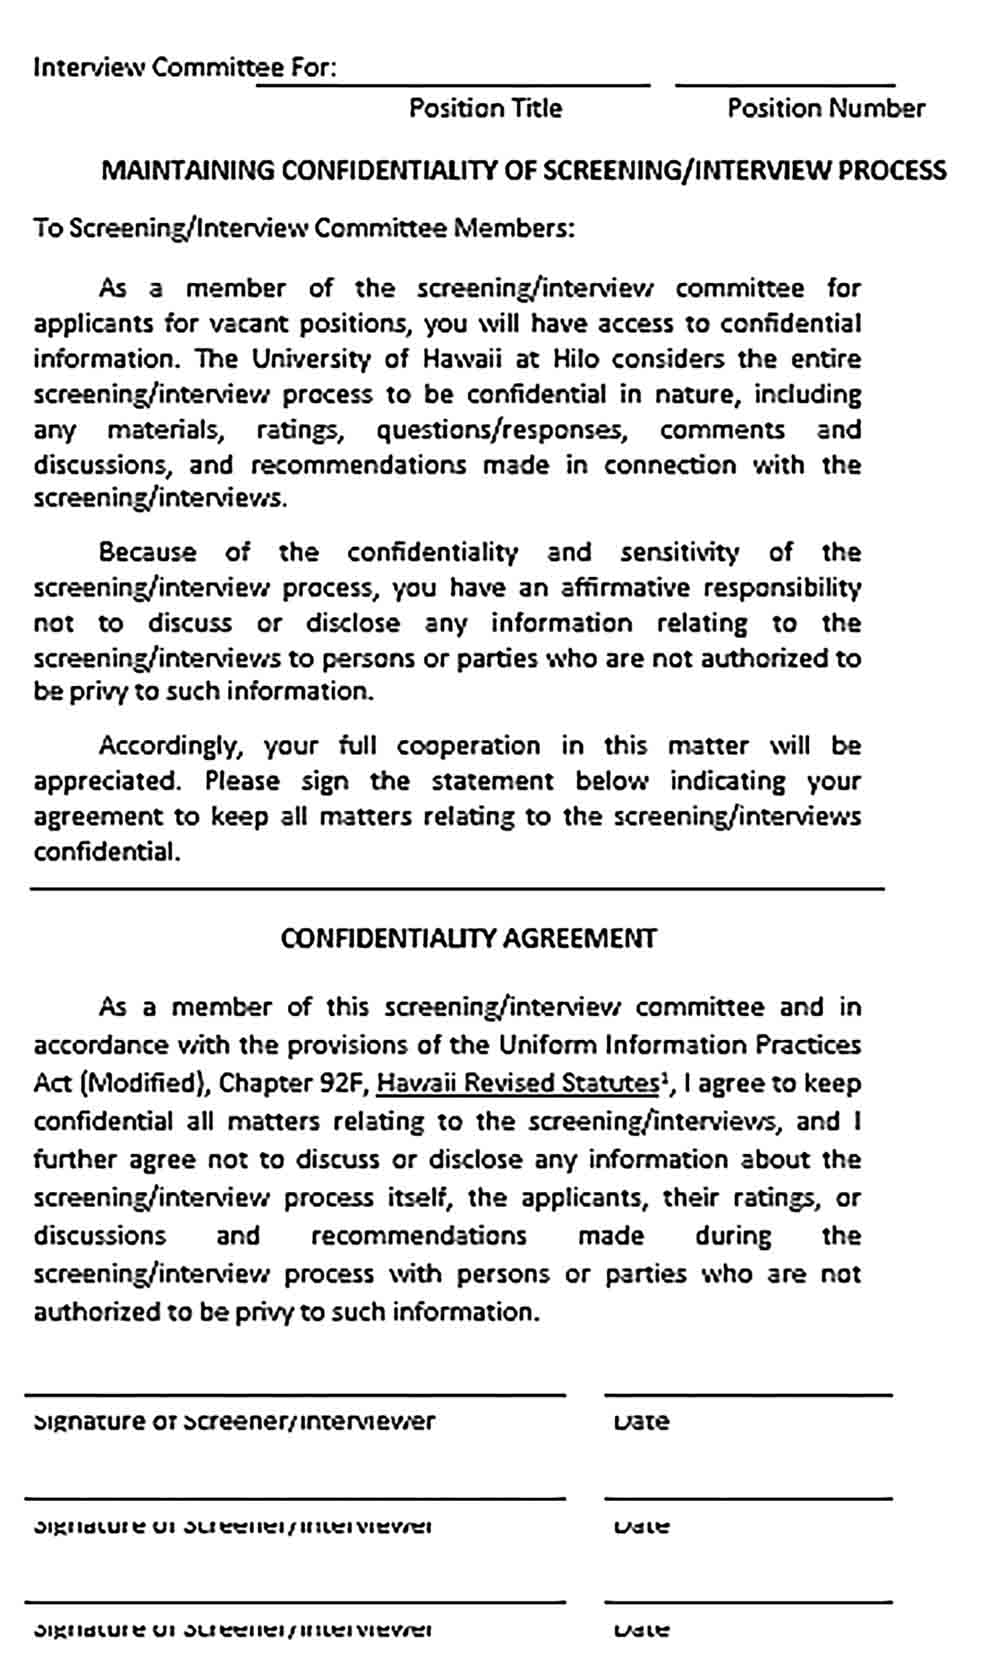 Sample Interview Confidentiality Agreement